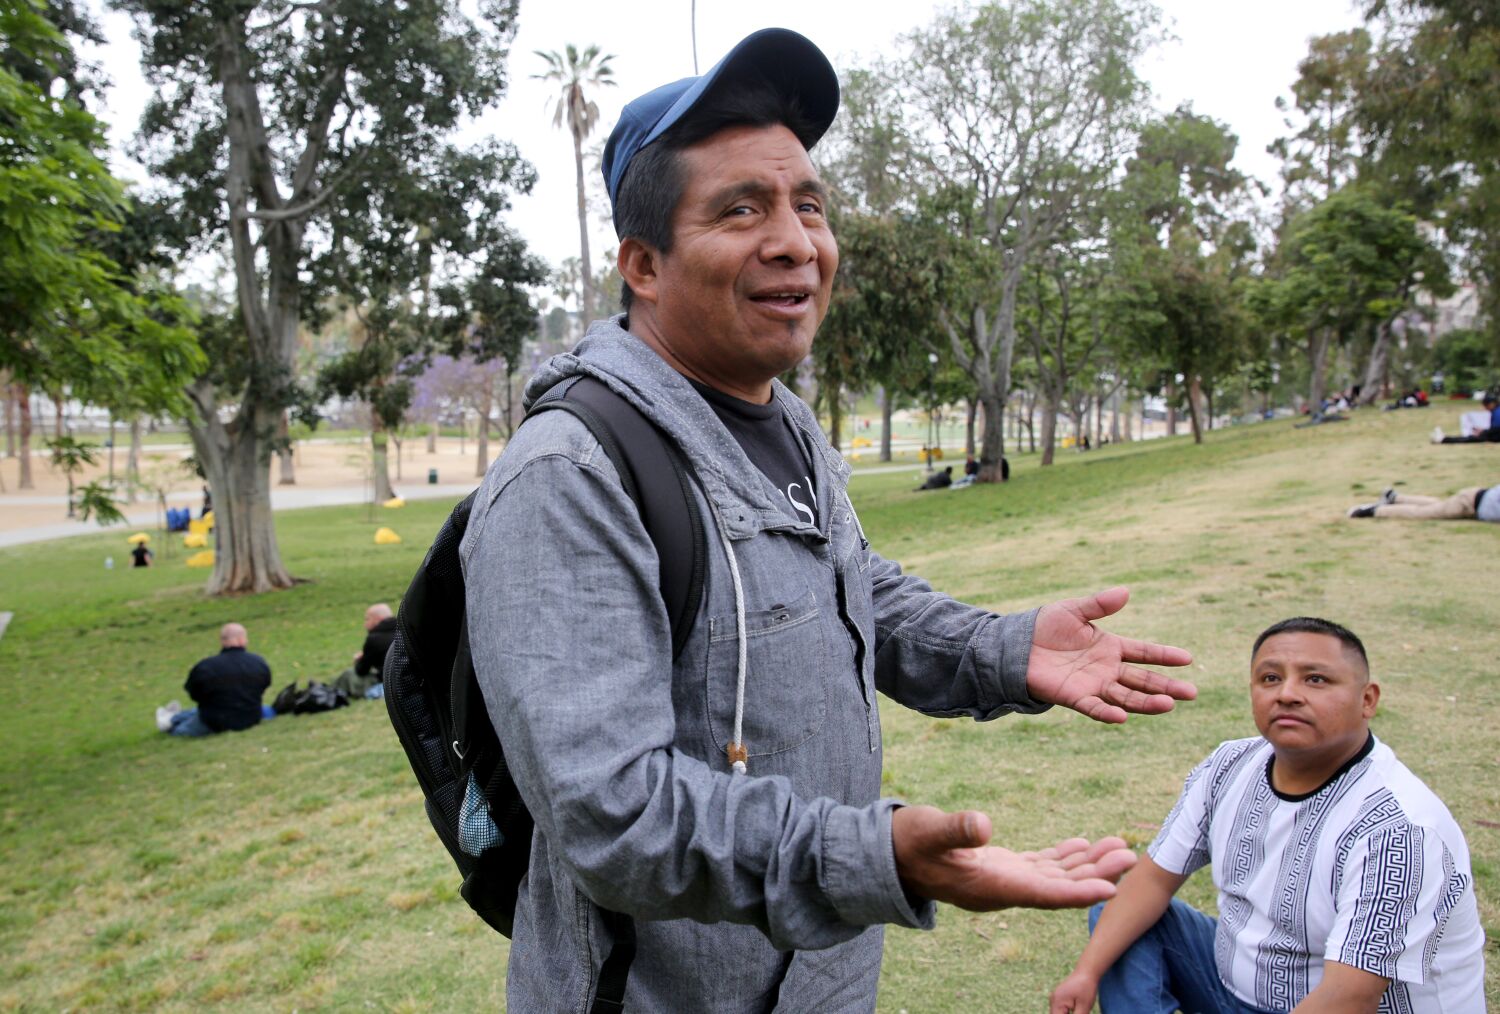 L.A. Latinos welcome 42 migrants bused from Texas as 'brothers and sisters'